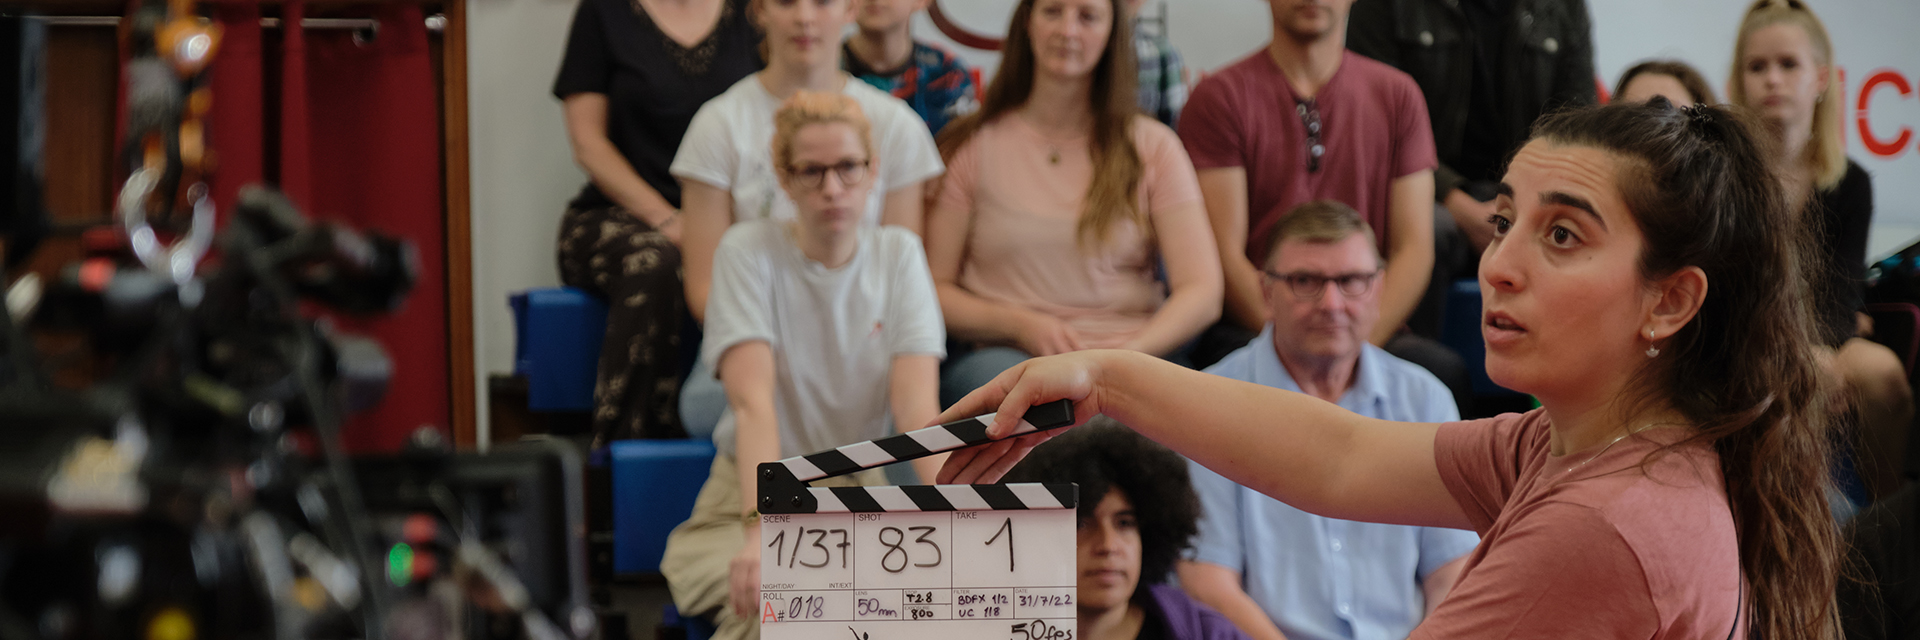 Student with clapperboard on set